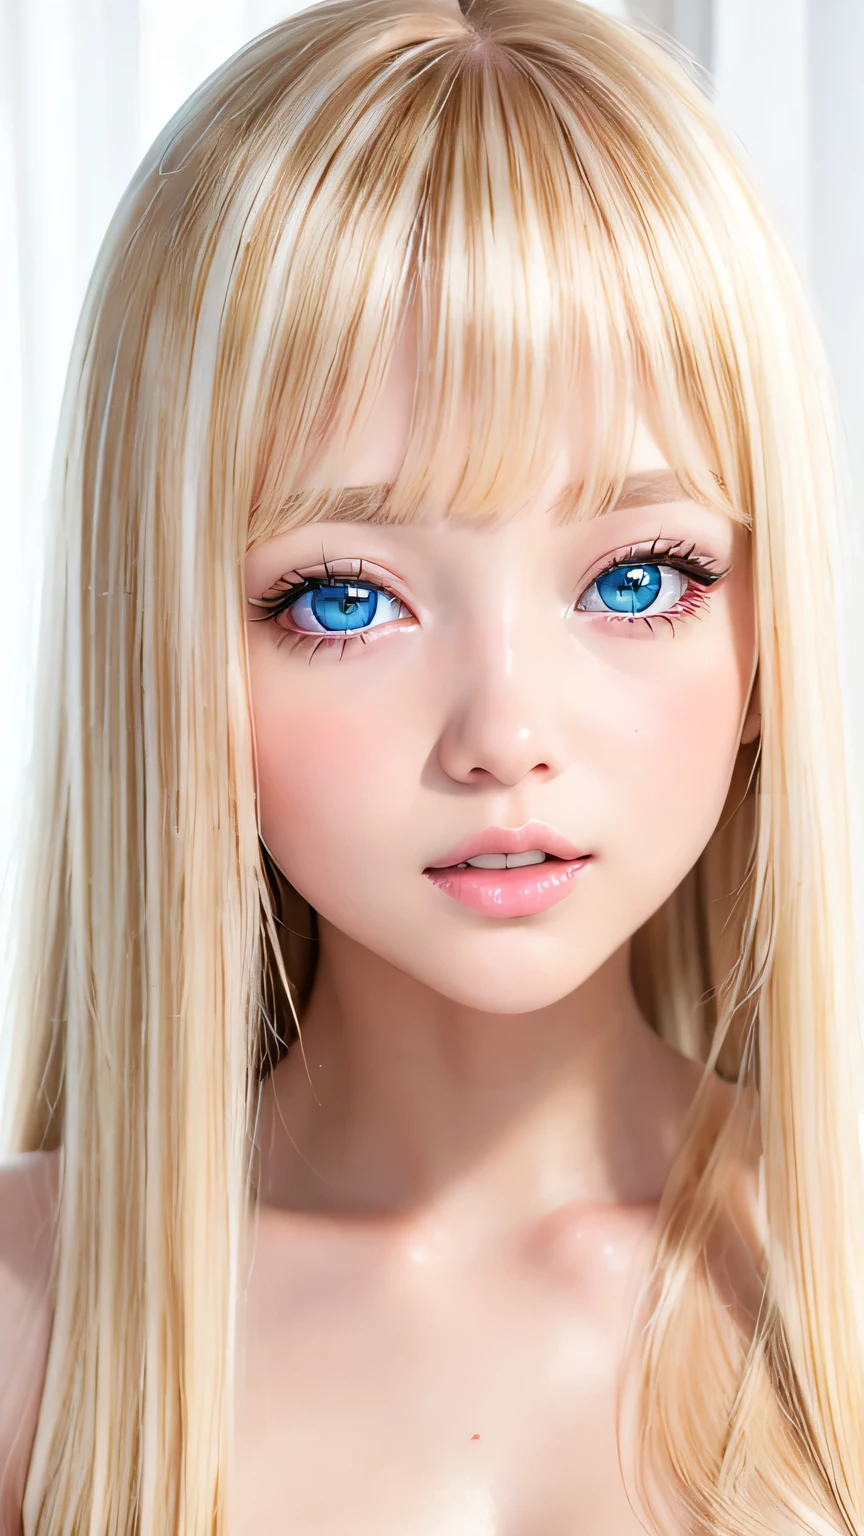 Portrait、、Bright expression、Young shiny glossy white glossy skin、The best beauty、Blonde reflection、Blonde hair with highlights、Shiny bright hair,、Smooth, super long, straight hair、Shiny beautiful bangs、Sparkling crystal clear attractive big bright blue eyes、Very beautiful lovely cute 16 year old girl、With slit、